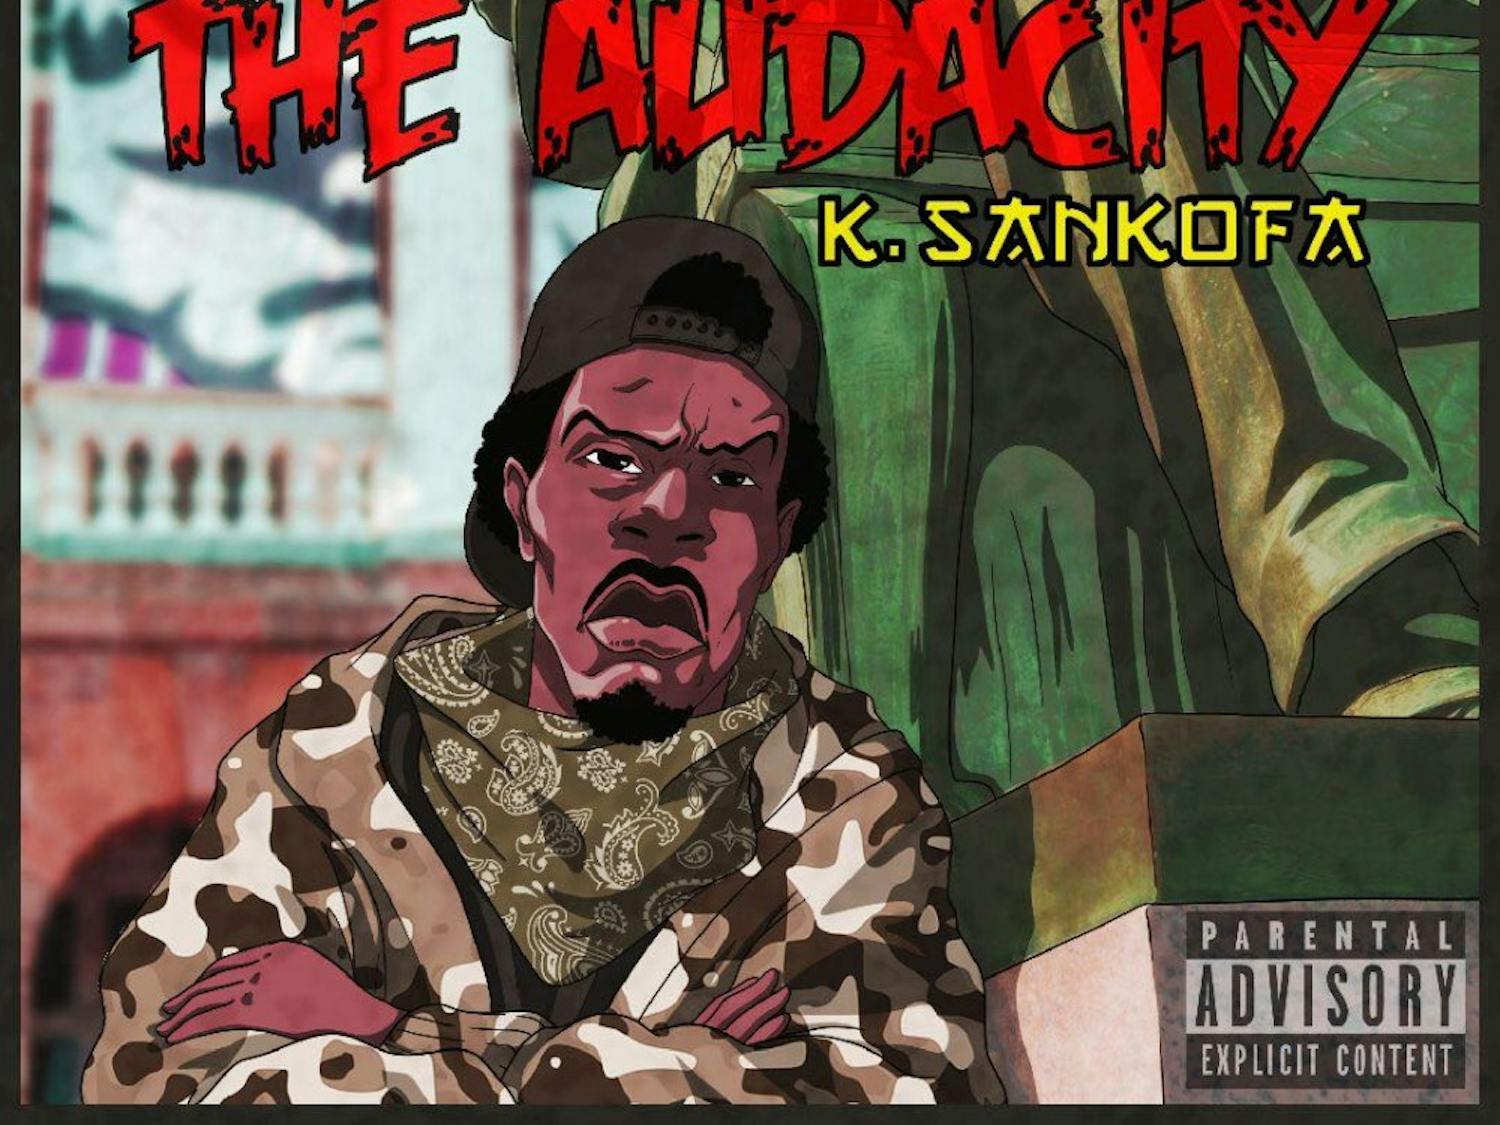 'The Audacity' is K. Sankofa's first major project.